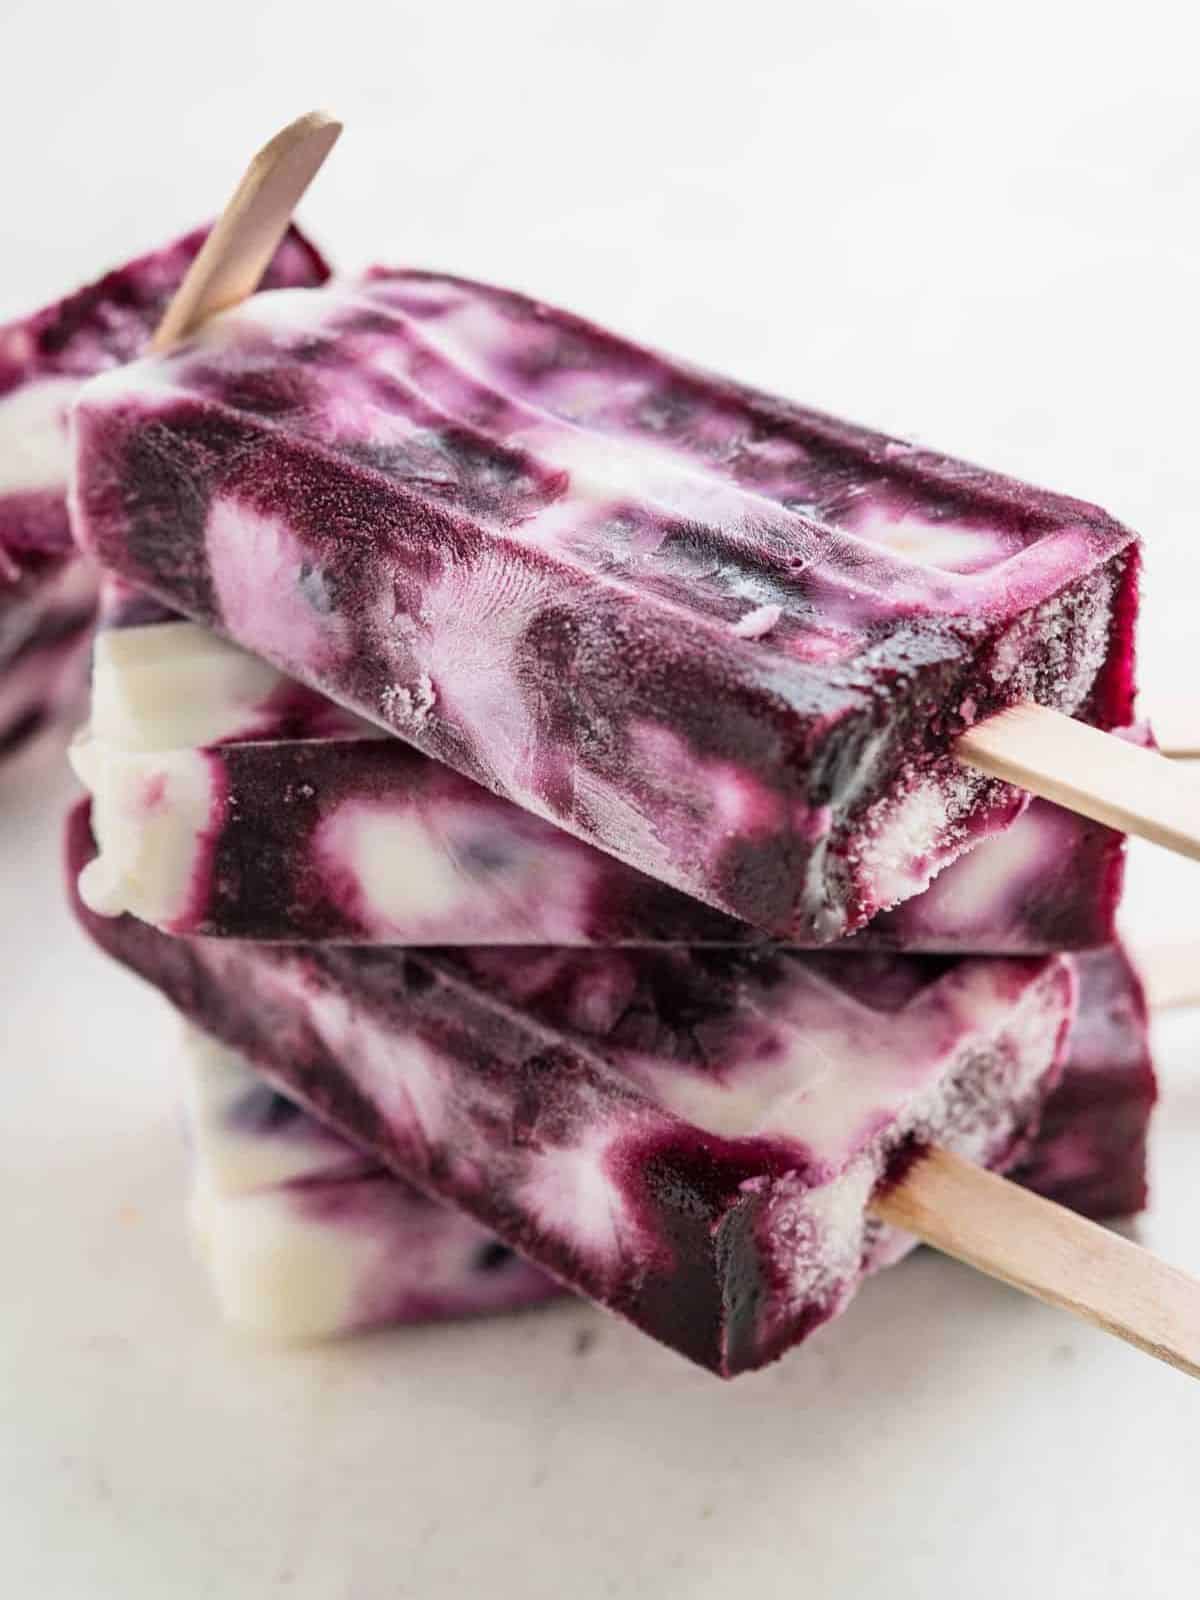 creamy blueberry swirl yogurt popsicles with loads of chewy whole blueberries and a hint of lemon.